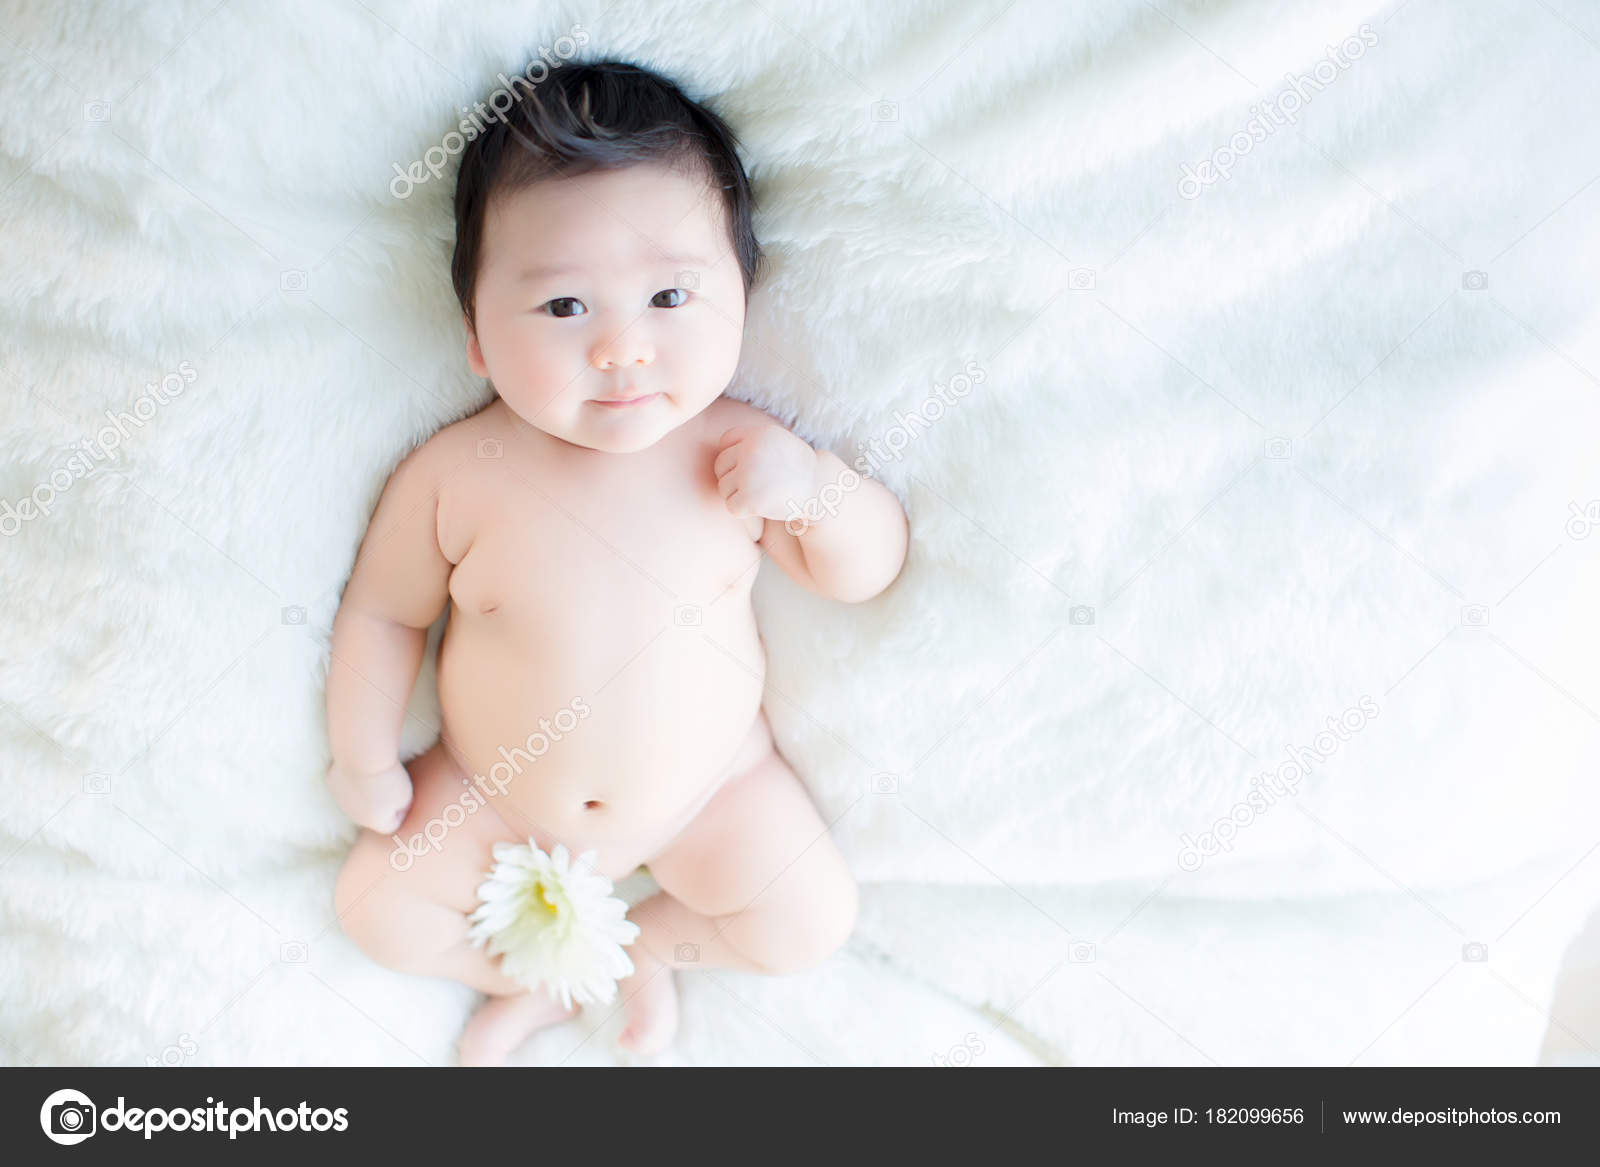 Cute Baby Boy Shooting Studio Fashion Image Baby Family Lovely ...